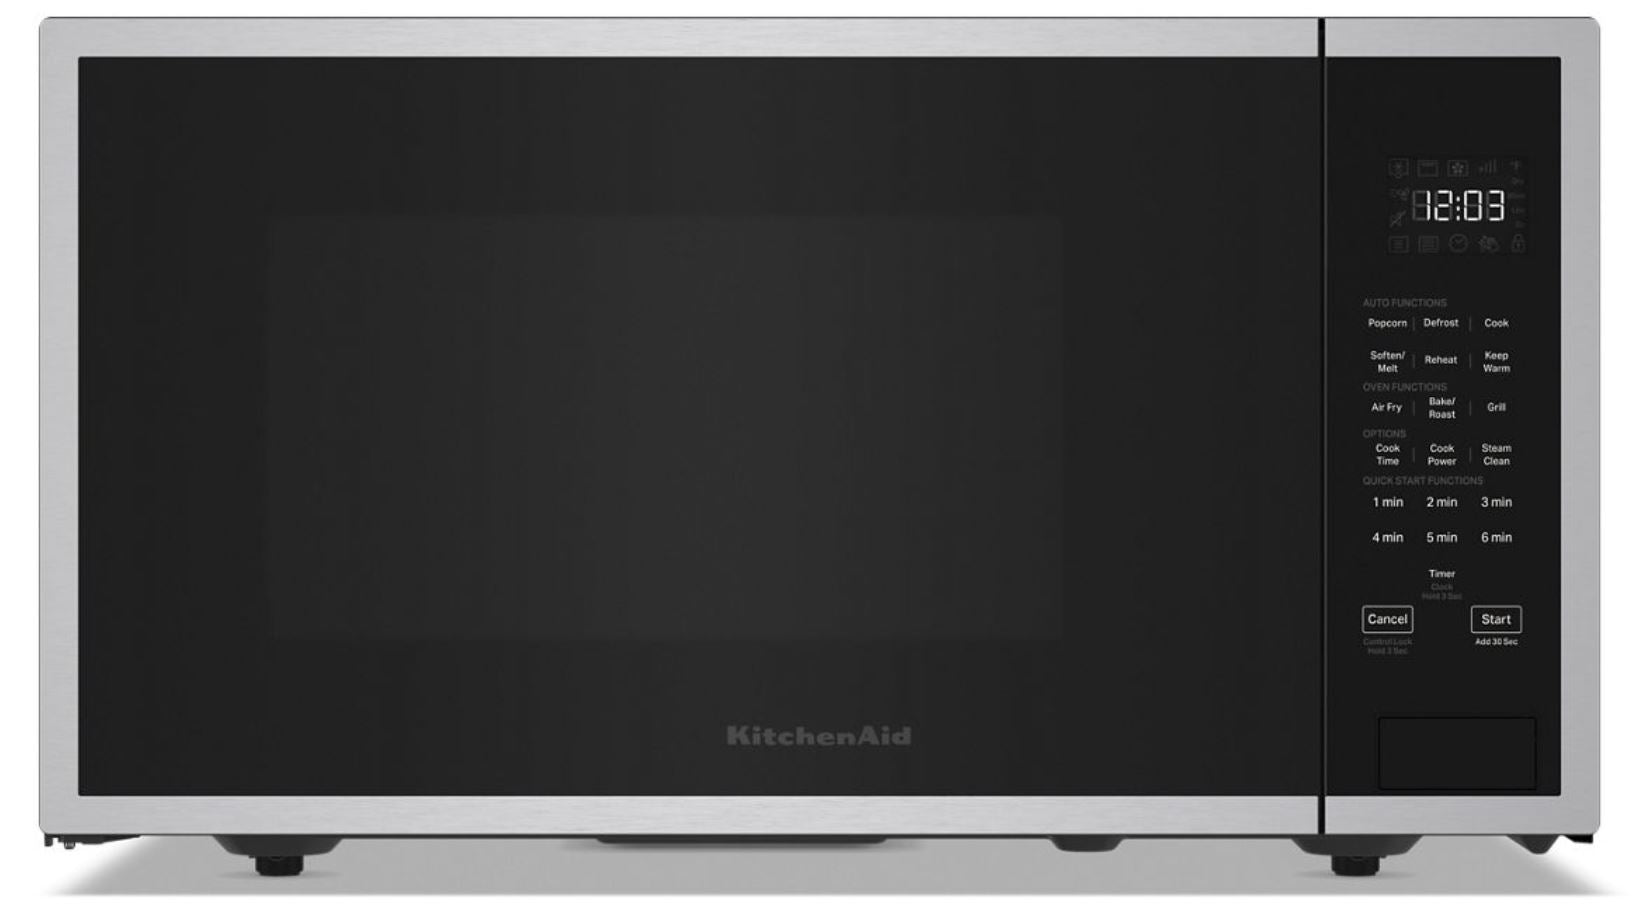 KitchenAid - 1.5 cu. Ft  Counter top Microwave in Stainless - KMCS522PPS